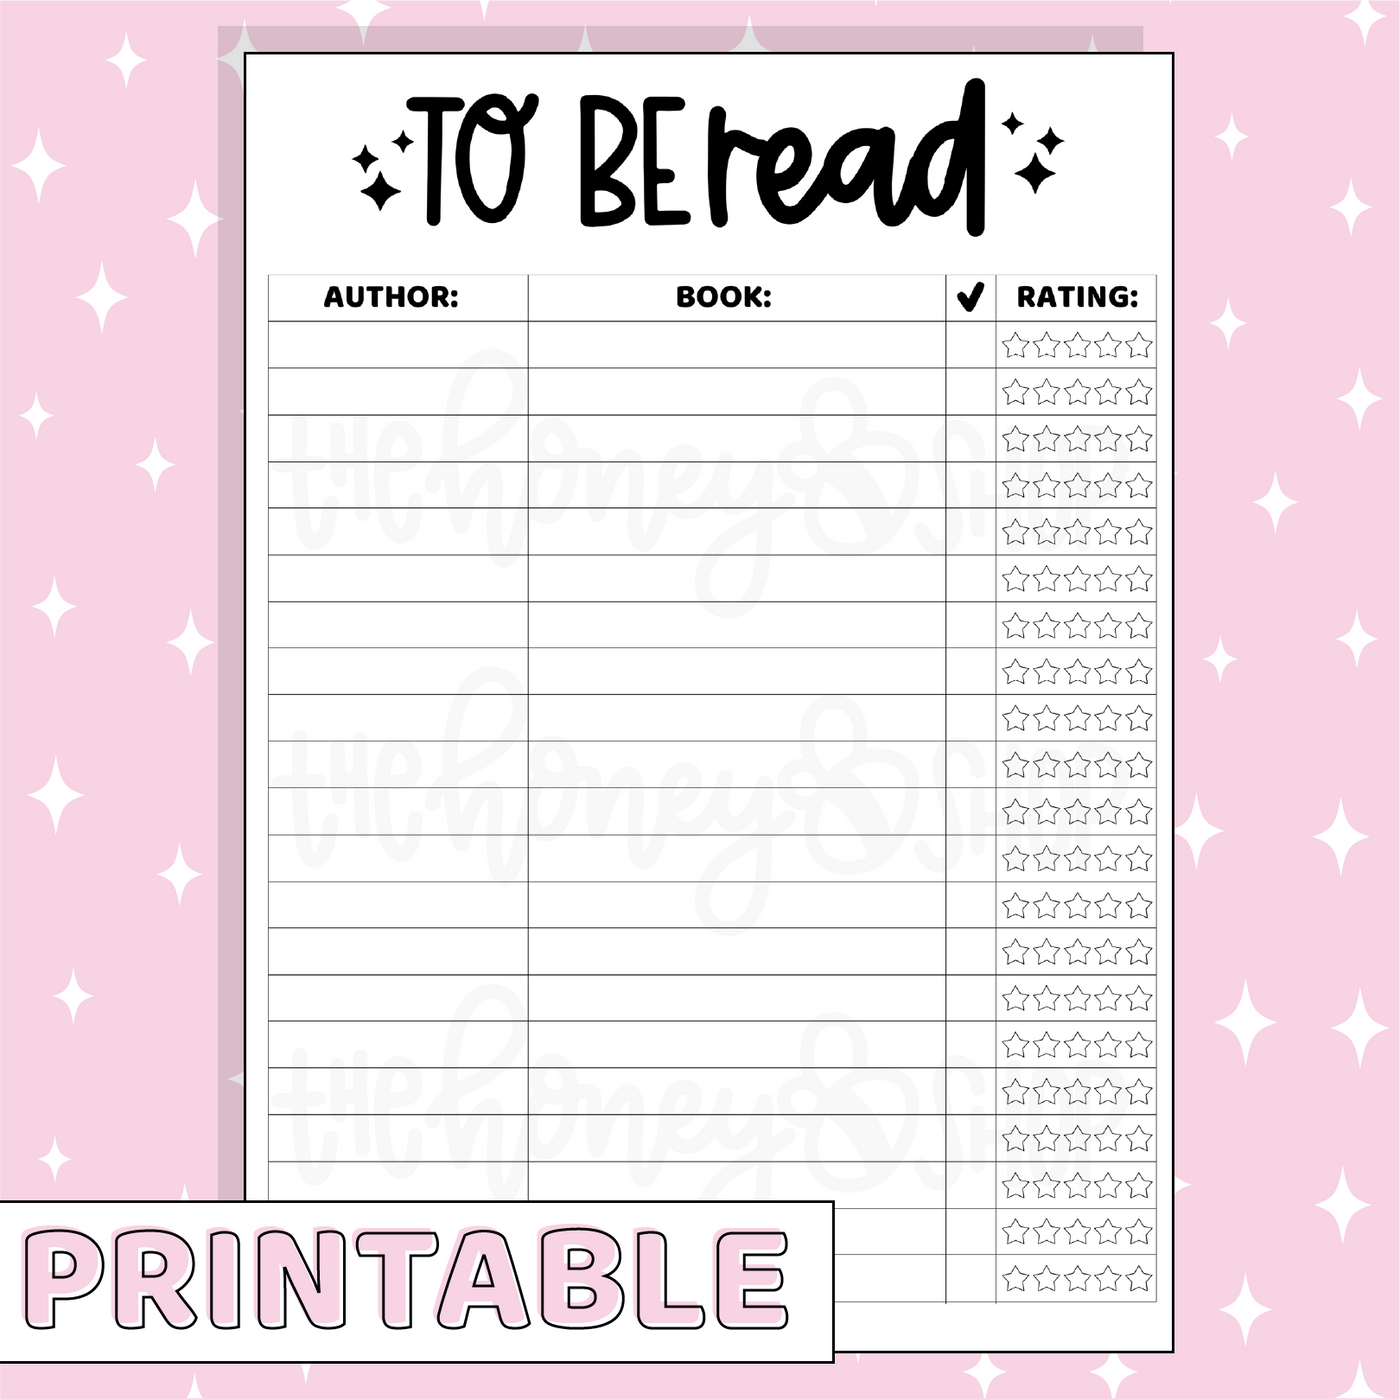 To Be Read Printable Bee-6 Full Page Sticker | B6 Planner | Printable Planner Stickers